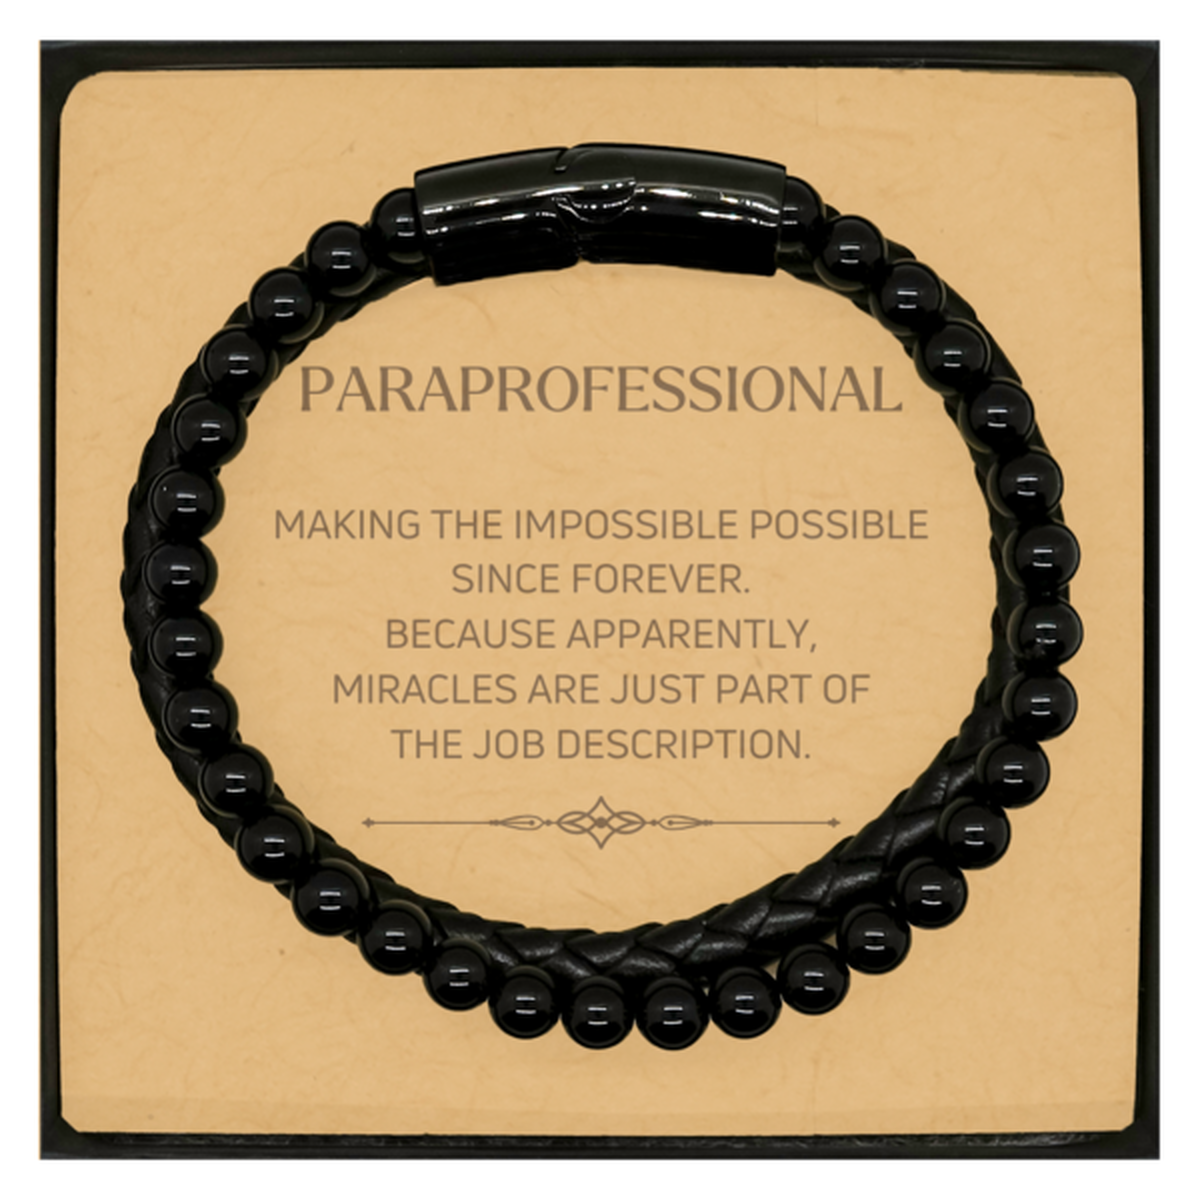 Funny Paraprofessional Gifts, Miracles are just part of the job description, Inspirational Birthday Christmas Stone Leather Bracelets For Paraprofessional, Men, Women, Coworkers, Friends, Boss